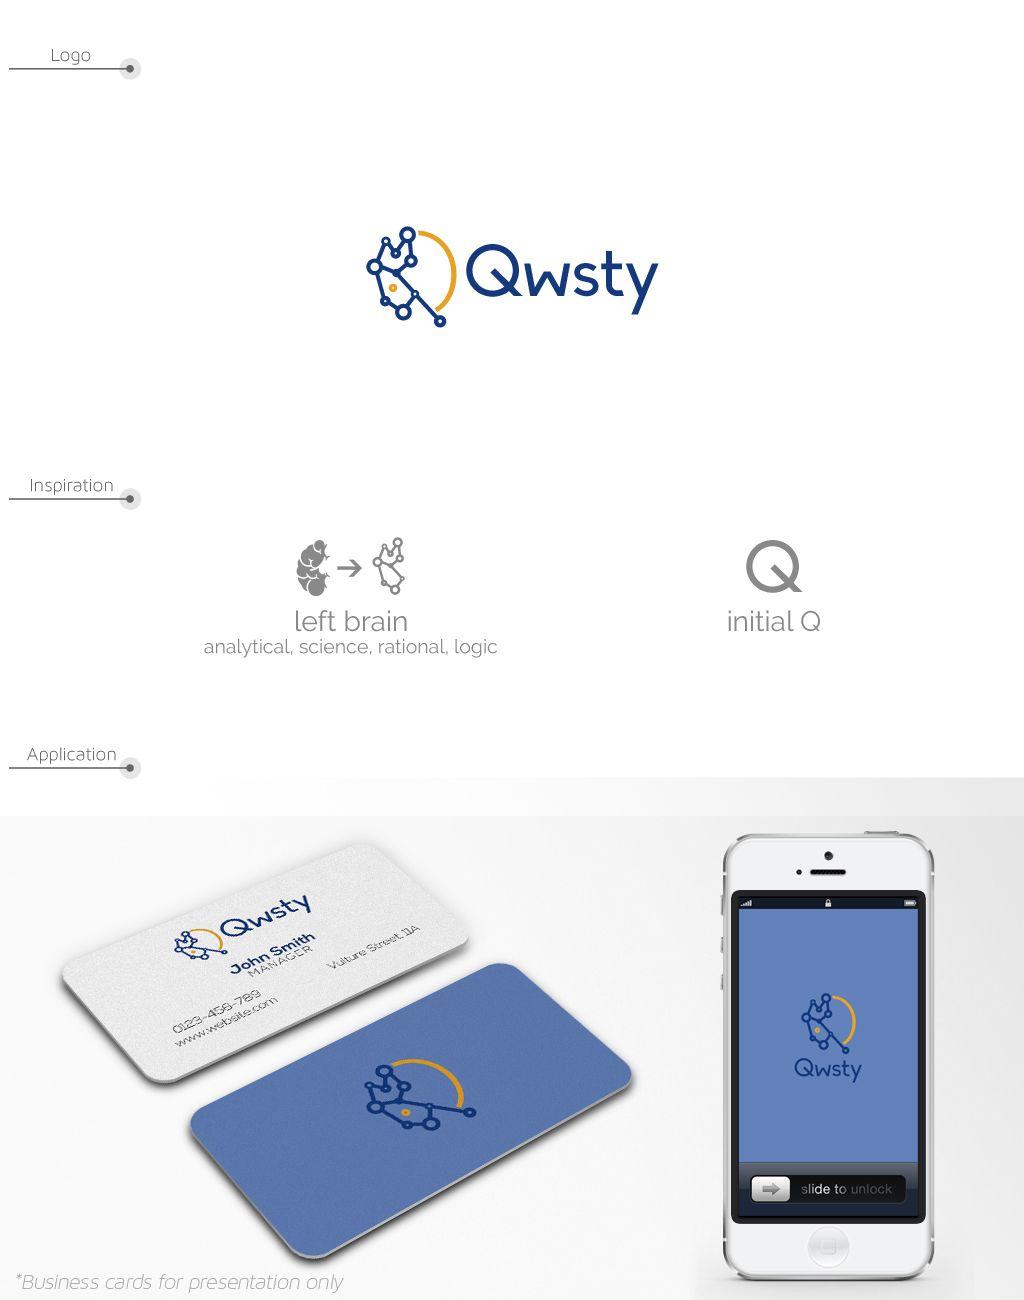 Electronic Education Logo - Bold, Modern, Education Logo Design for Qwsty by JohnM. | Design ...